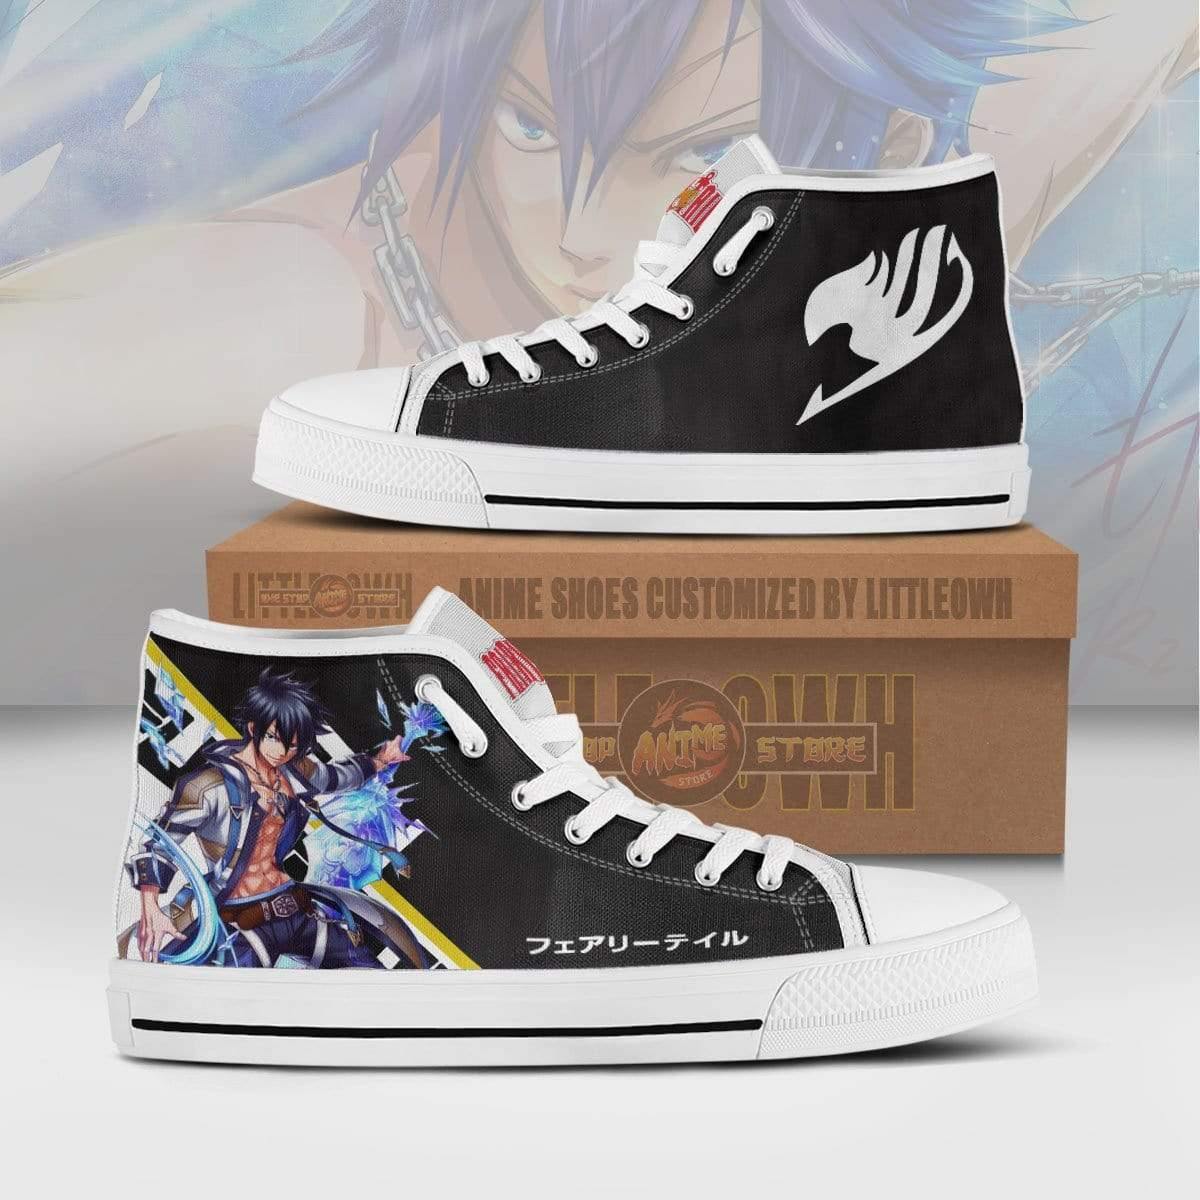 Gray Fullbuster High Top Canvas Shoes Custom Fairy Tail Anime Sneakers